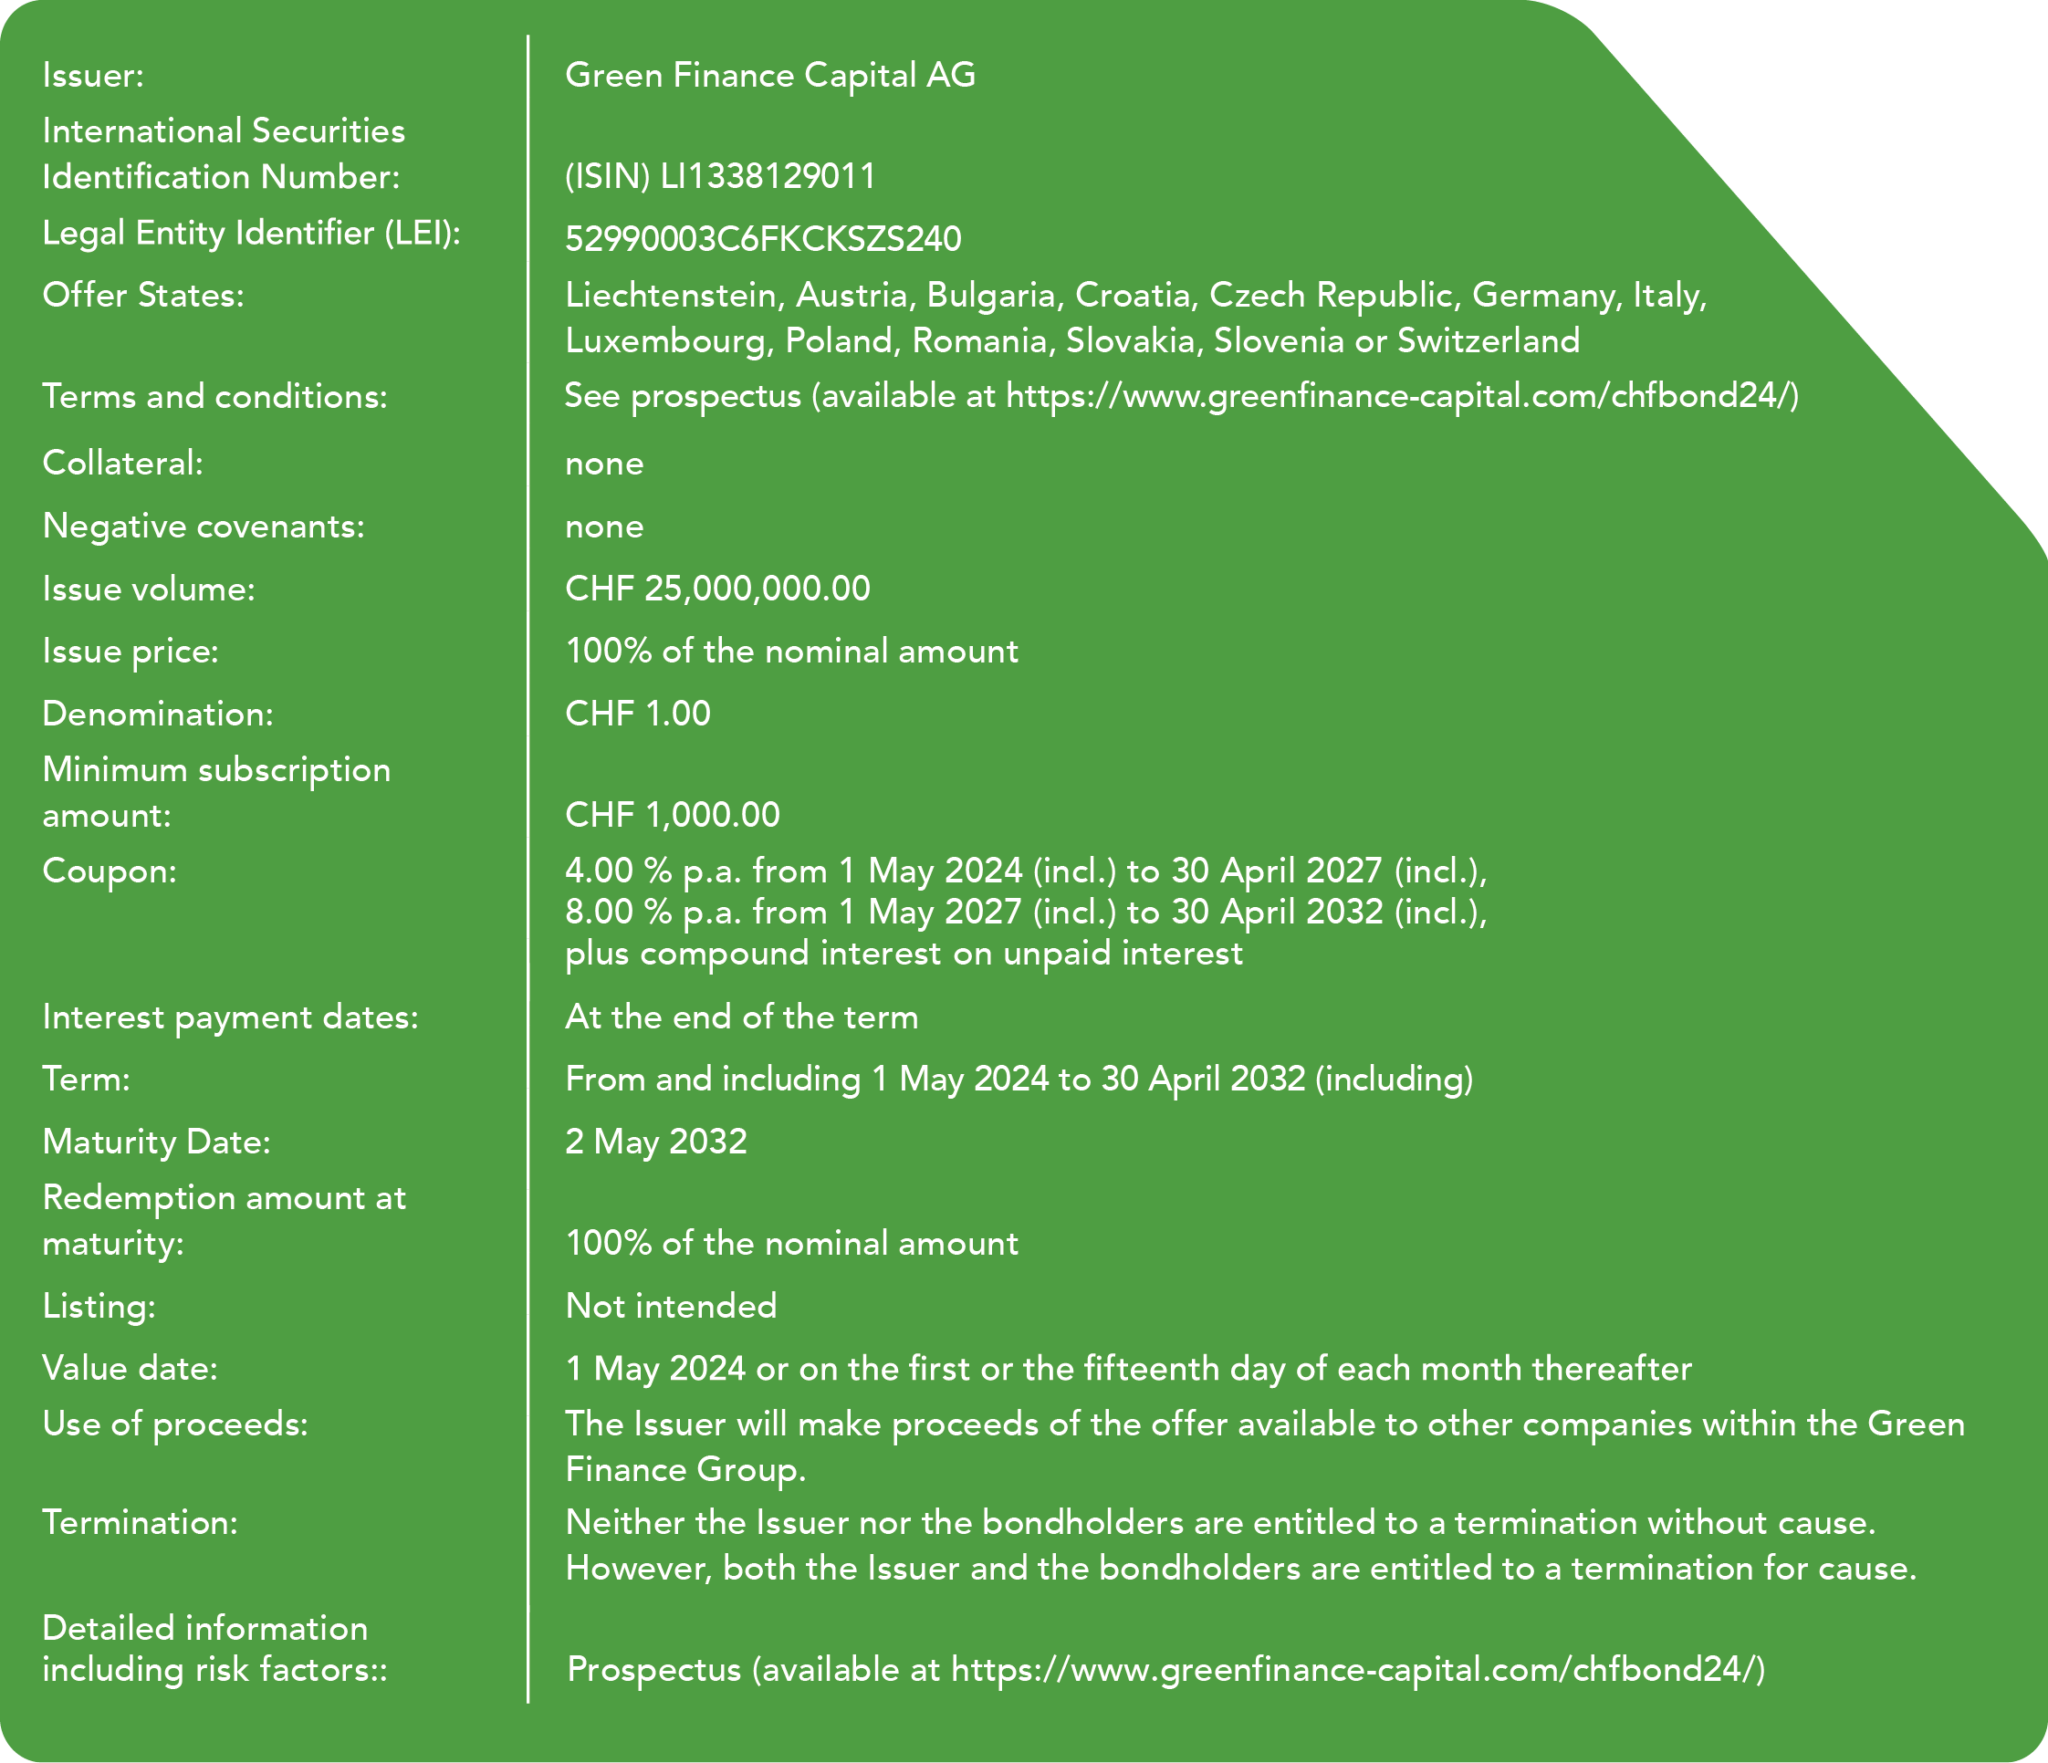 Facts about the Green Finance Capital CHF Step up Bond 2024-2032 - more information can be found in the description of the image.